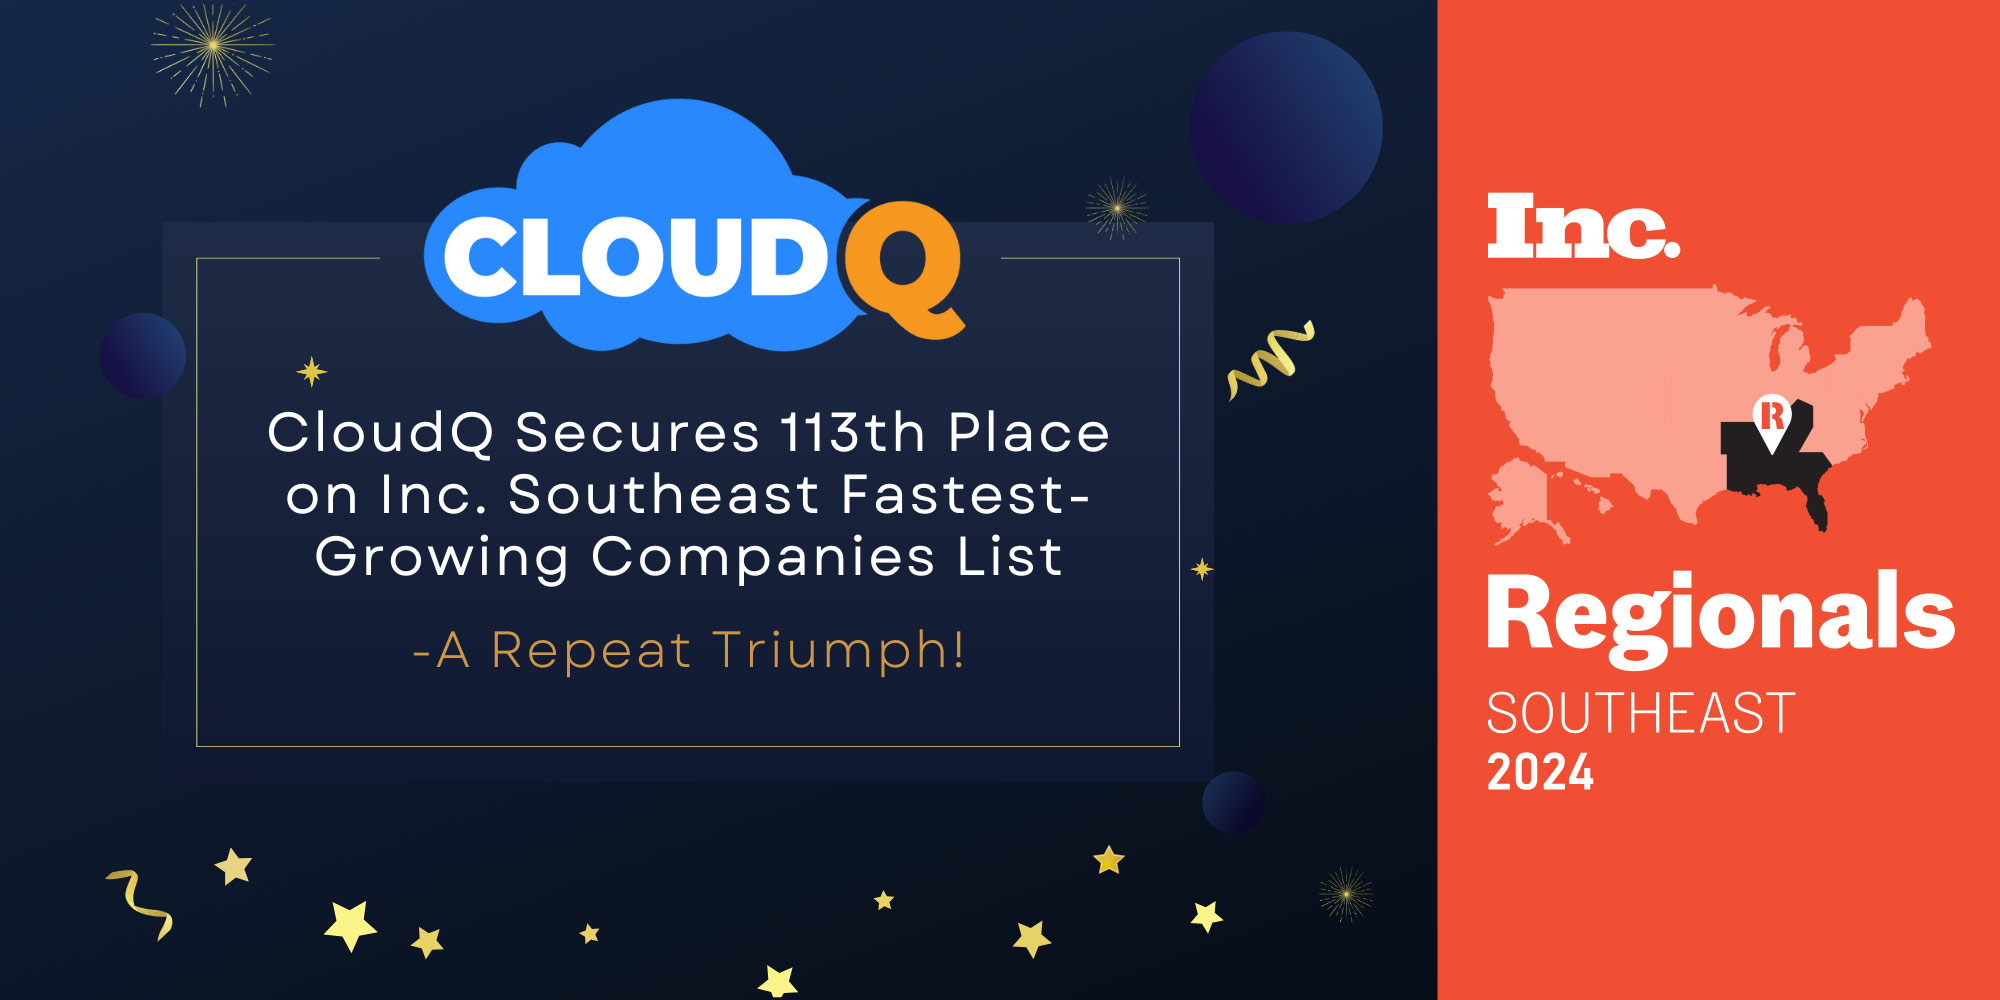 cloudq secures 113th place on inc southeast fastest growing companies list